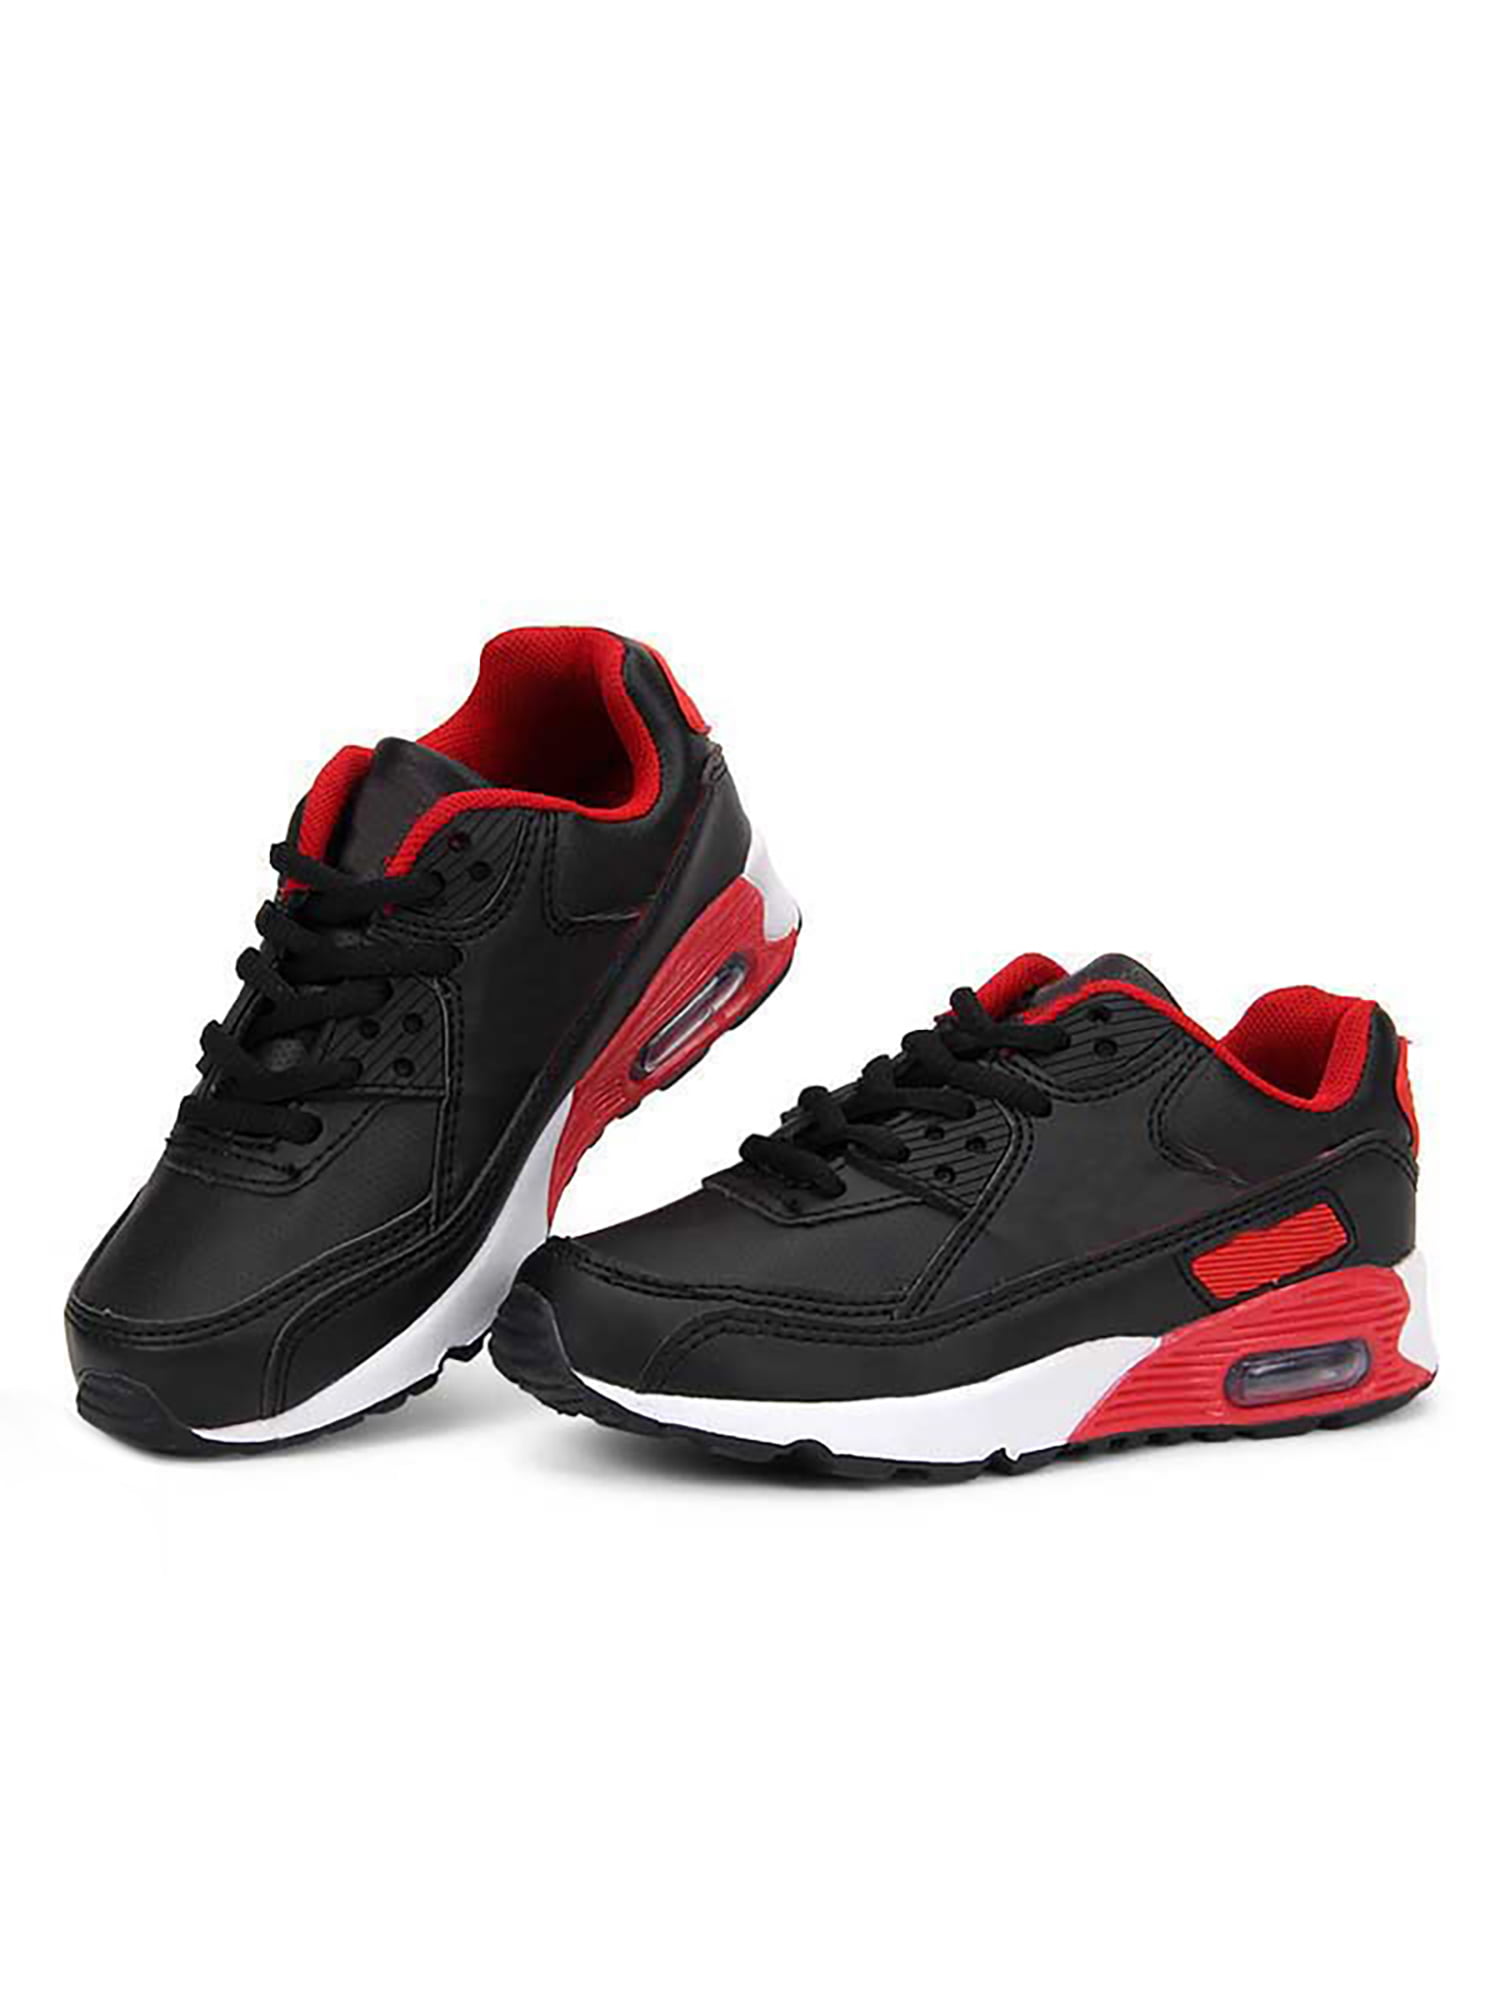 Little Kid/Big Kid Kids Running Tennis Shoes Lightweight Casual Walking Sneakers for Boys and Girls